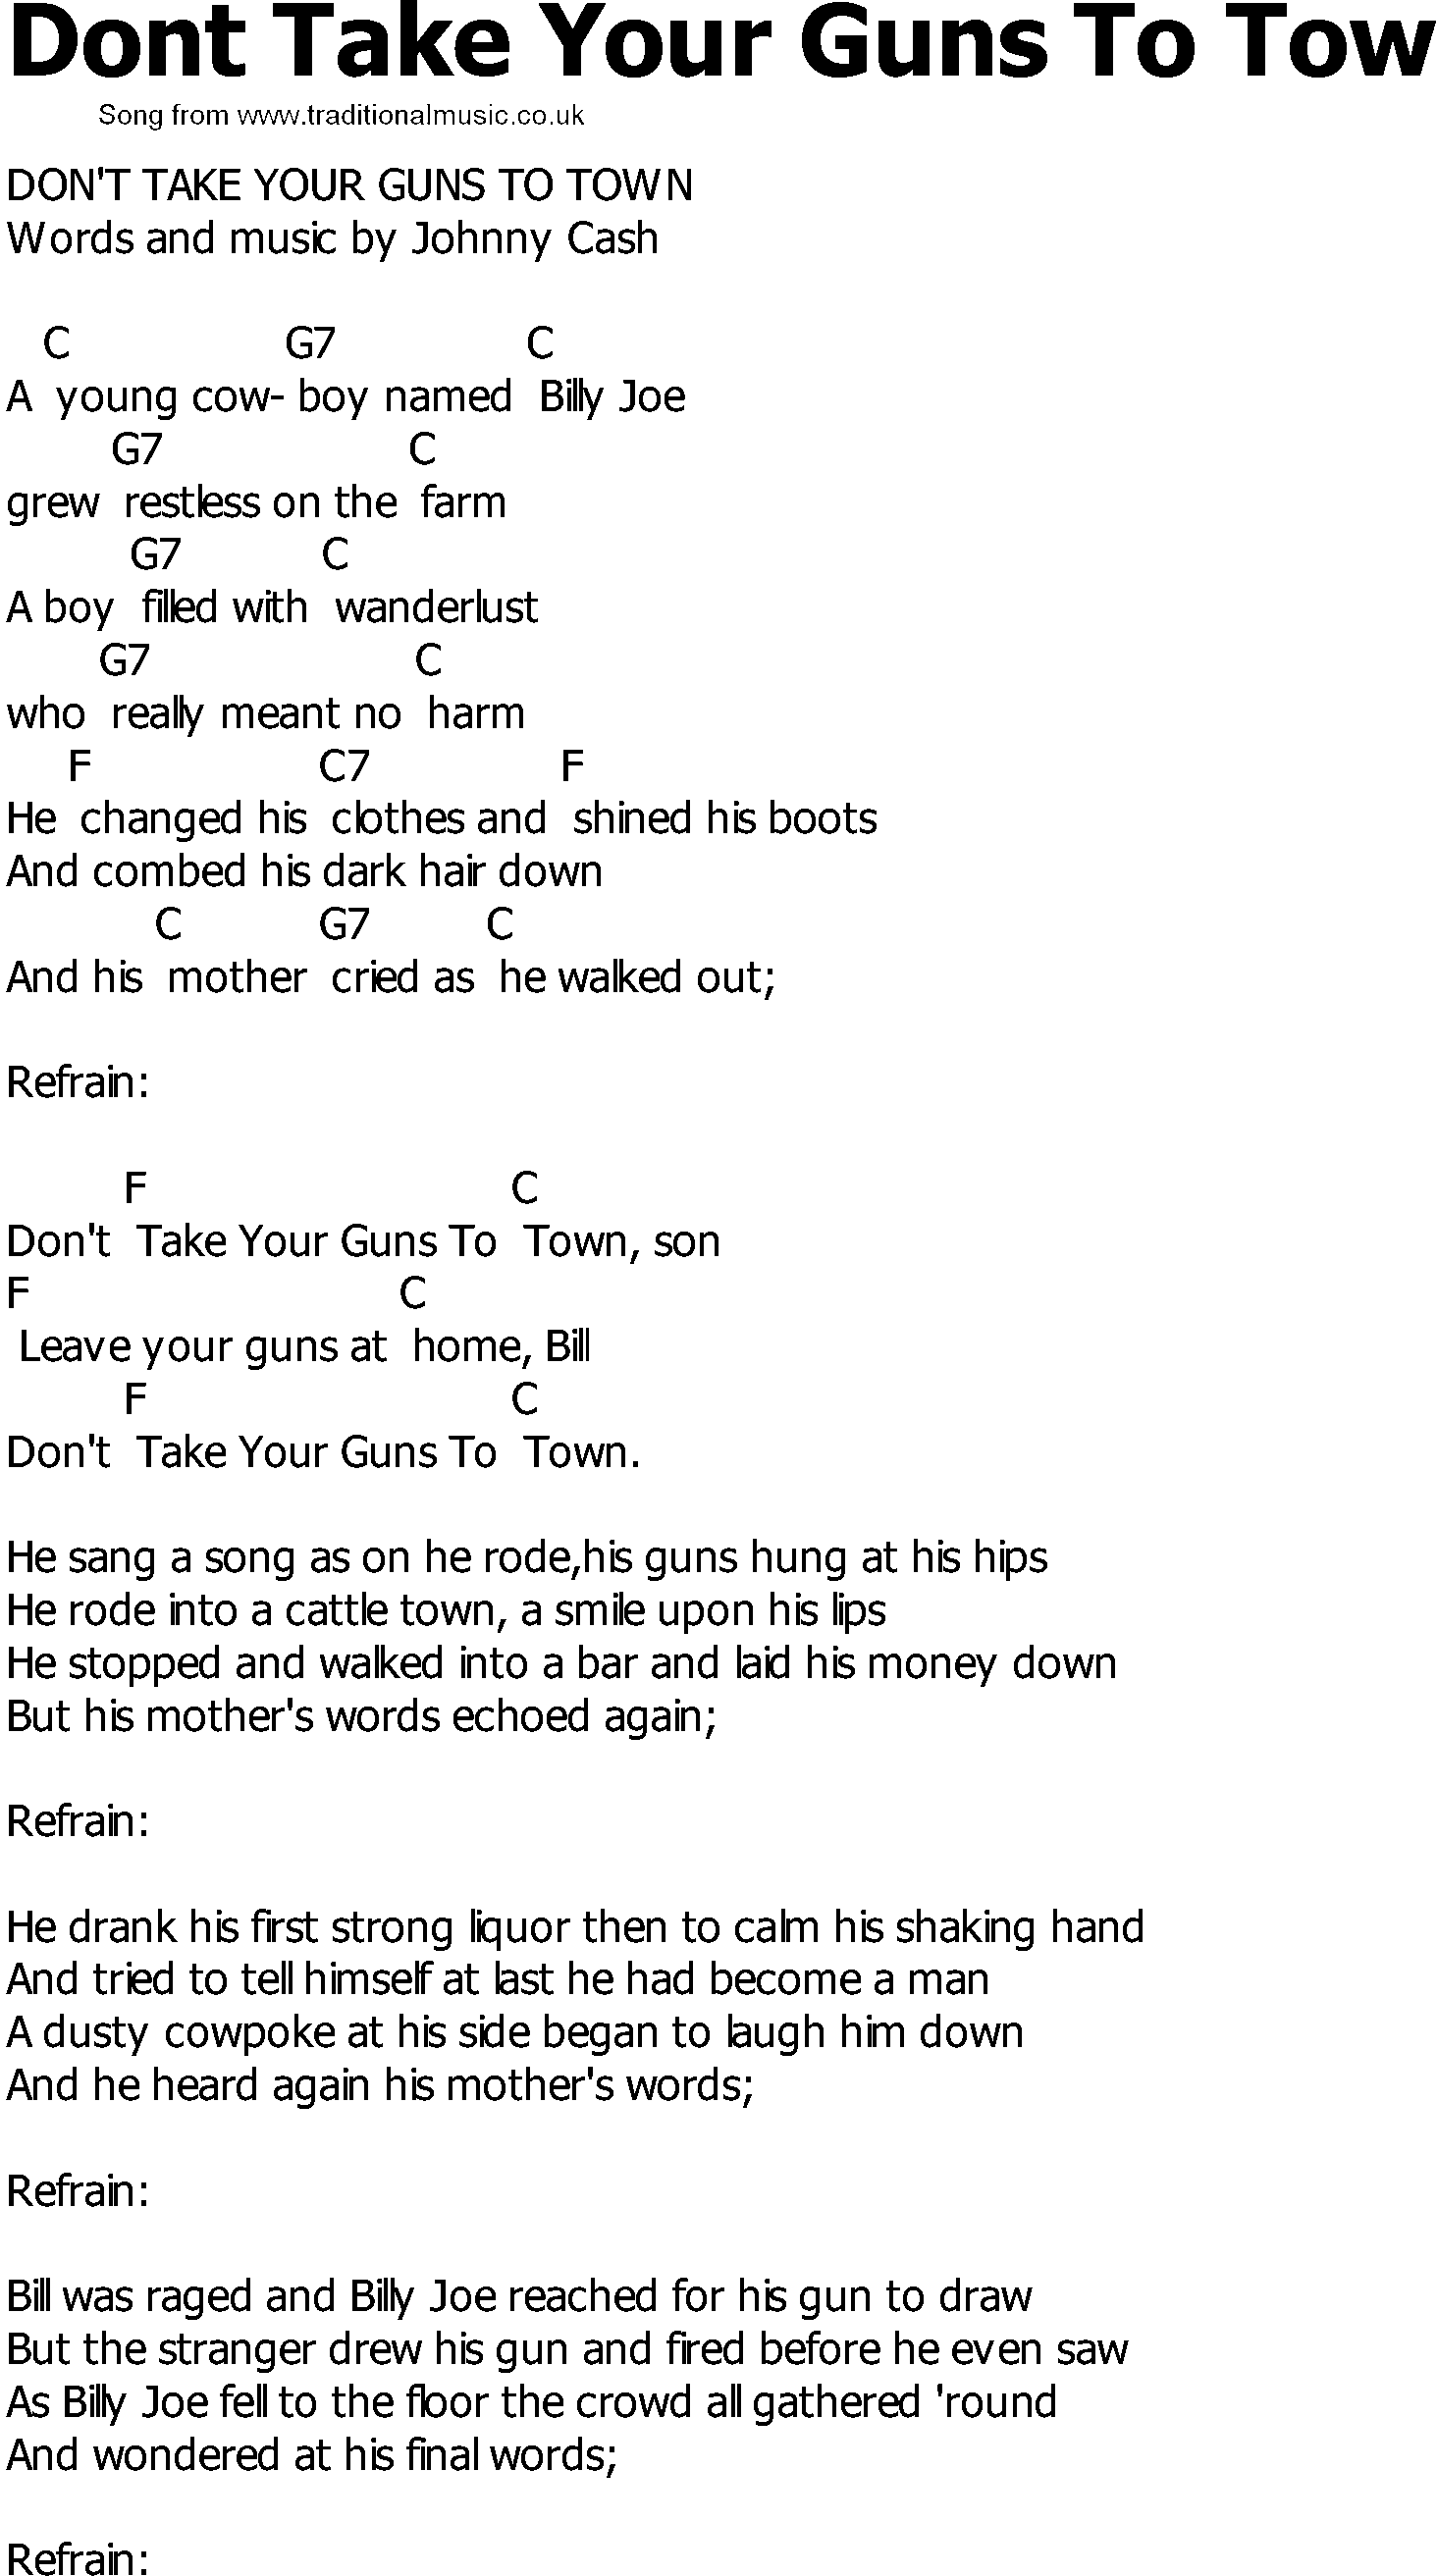 Old Country song lyrics with chords - Dont Take Your Guns To Tow